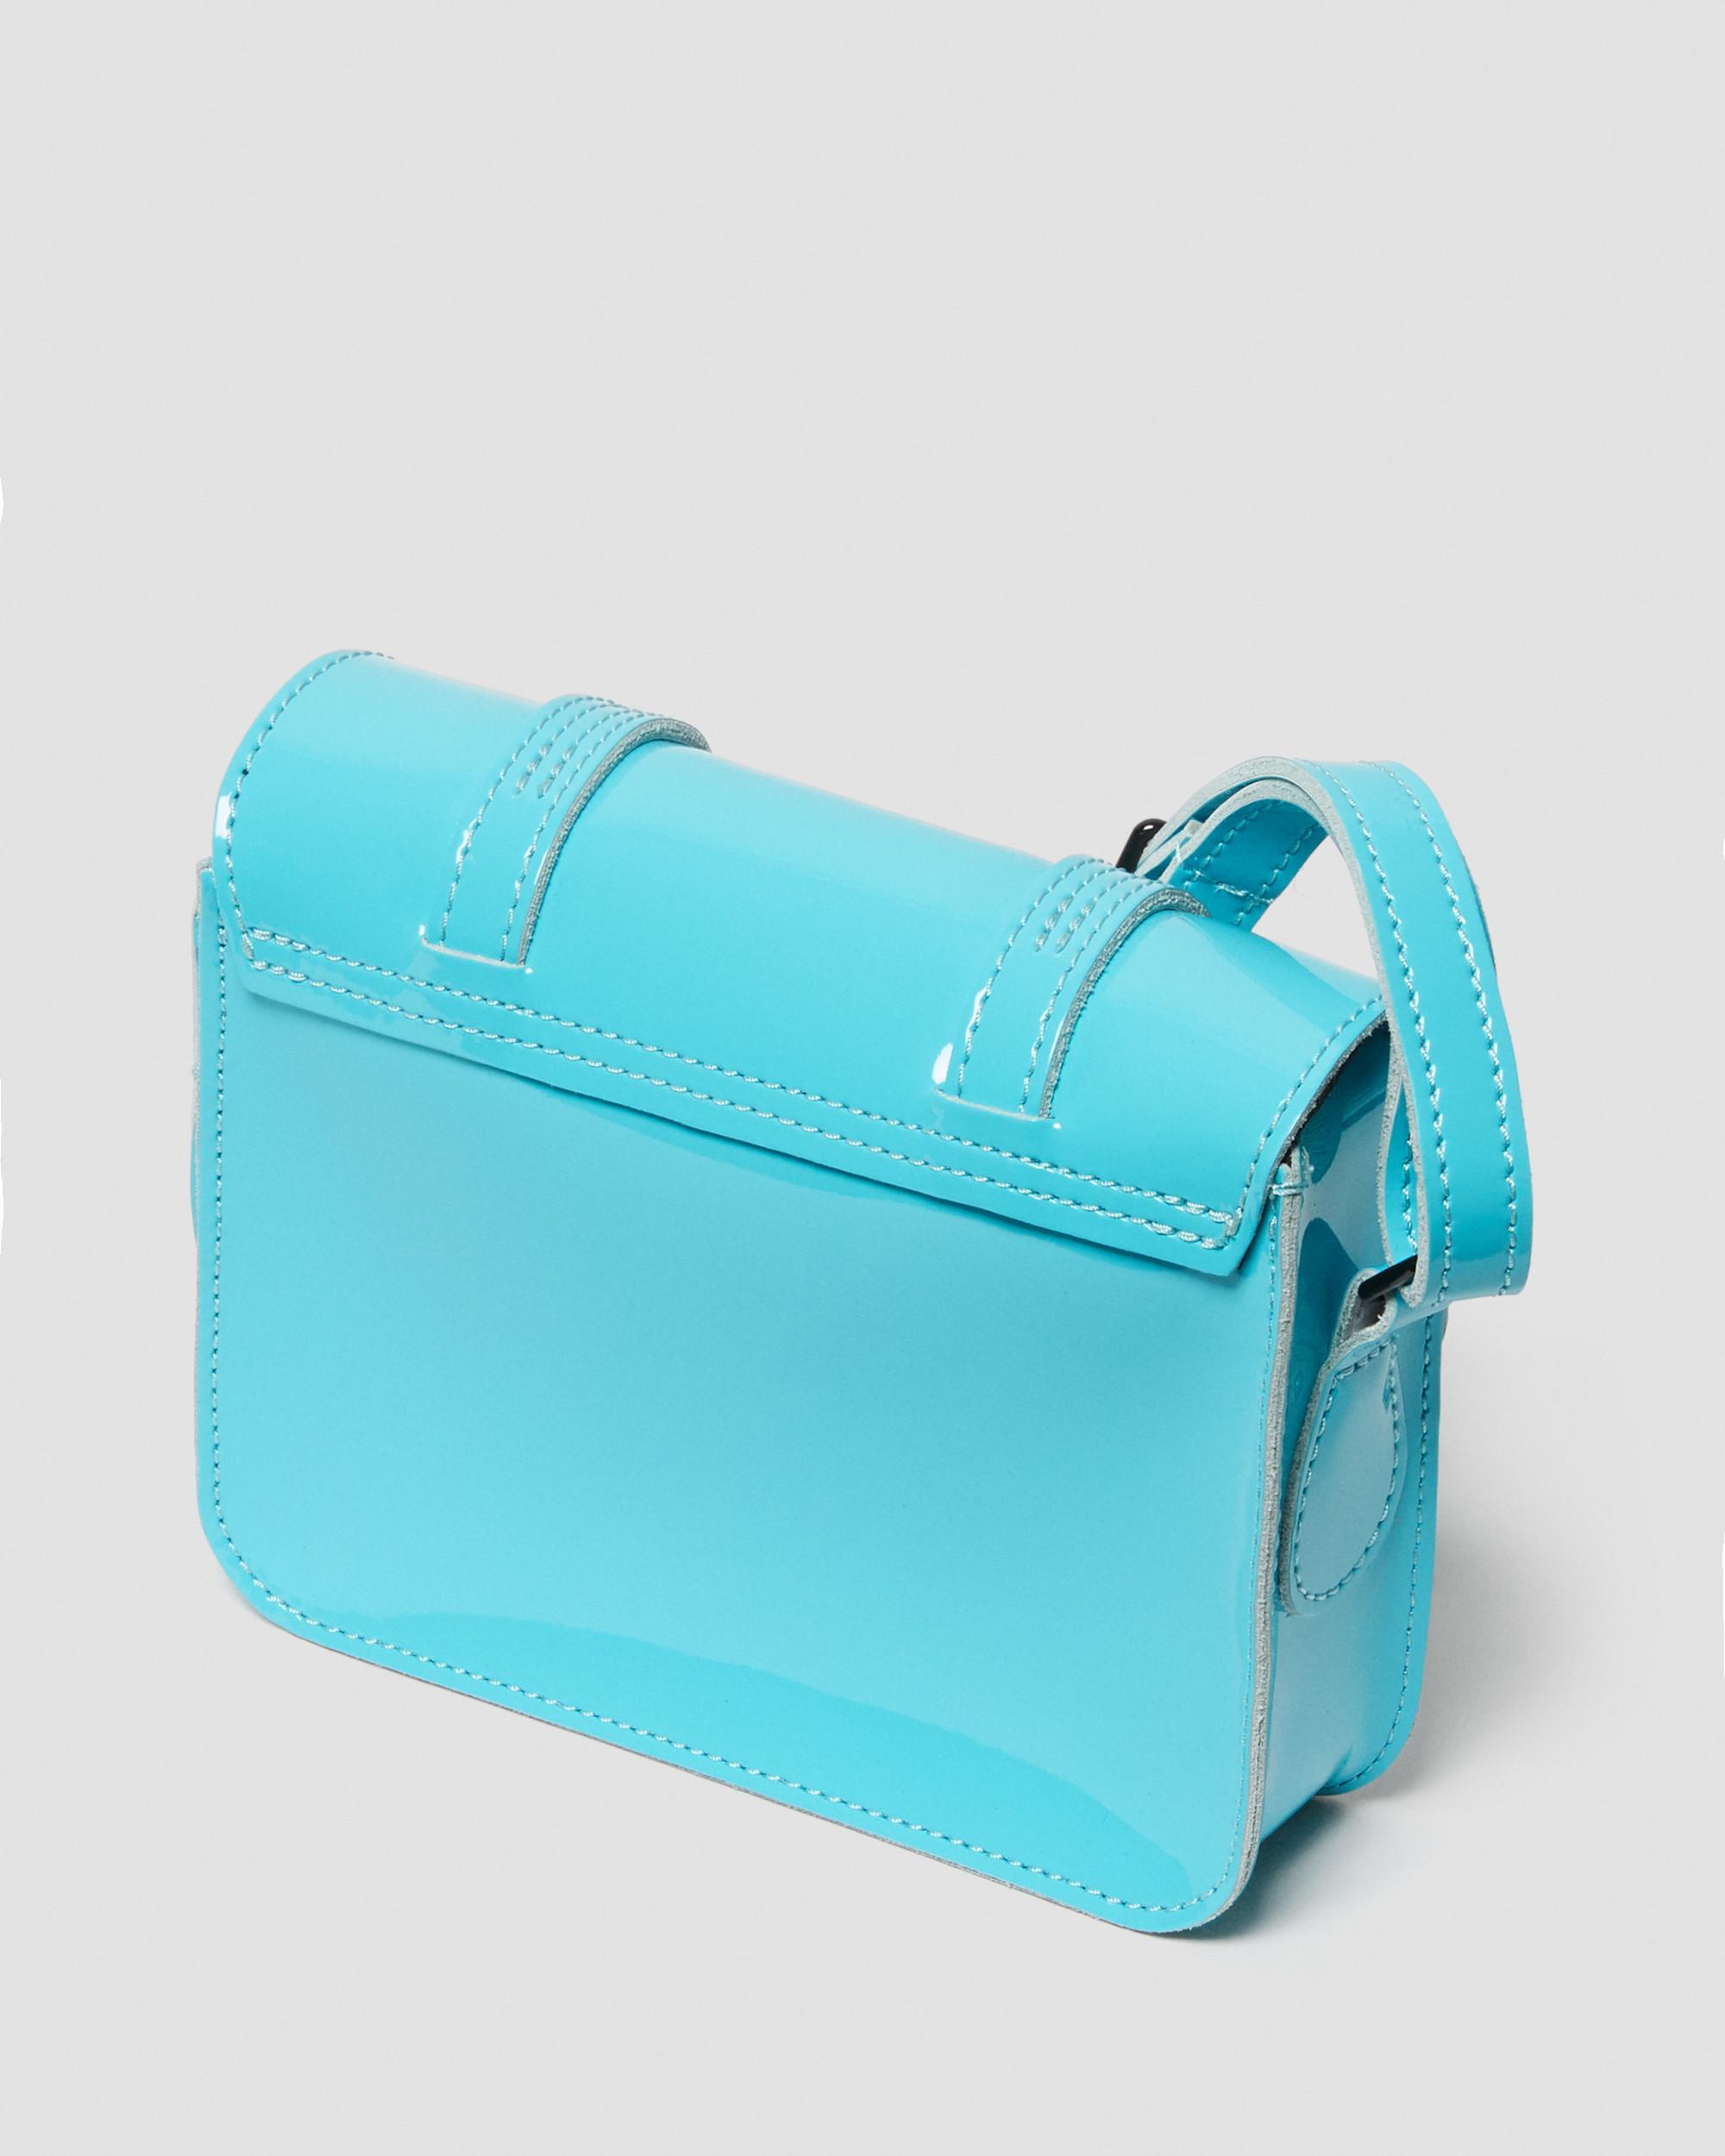 Dr. Martens 7 Inch Patent Leather Crossbody Bag - Turquoise